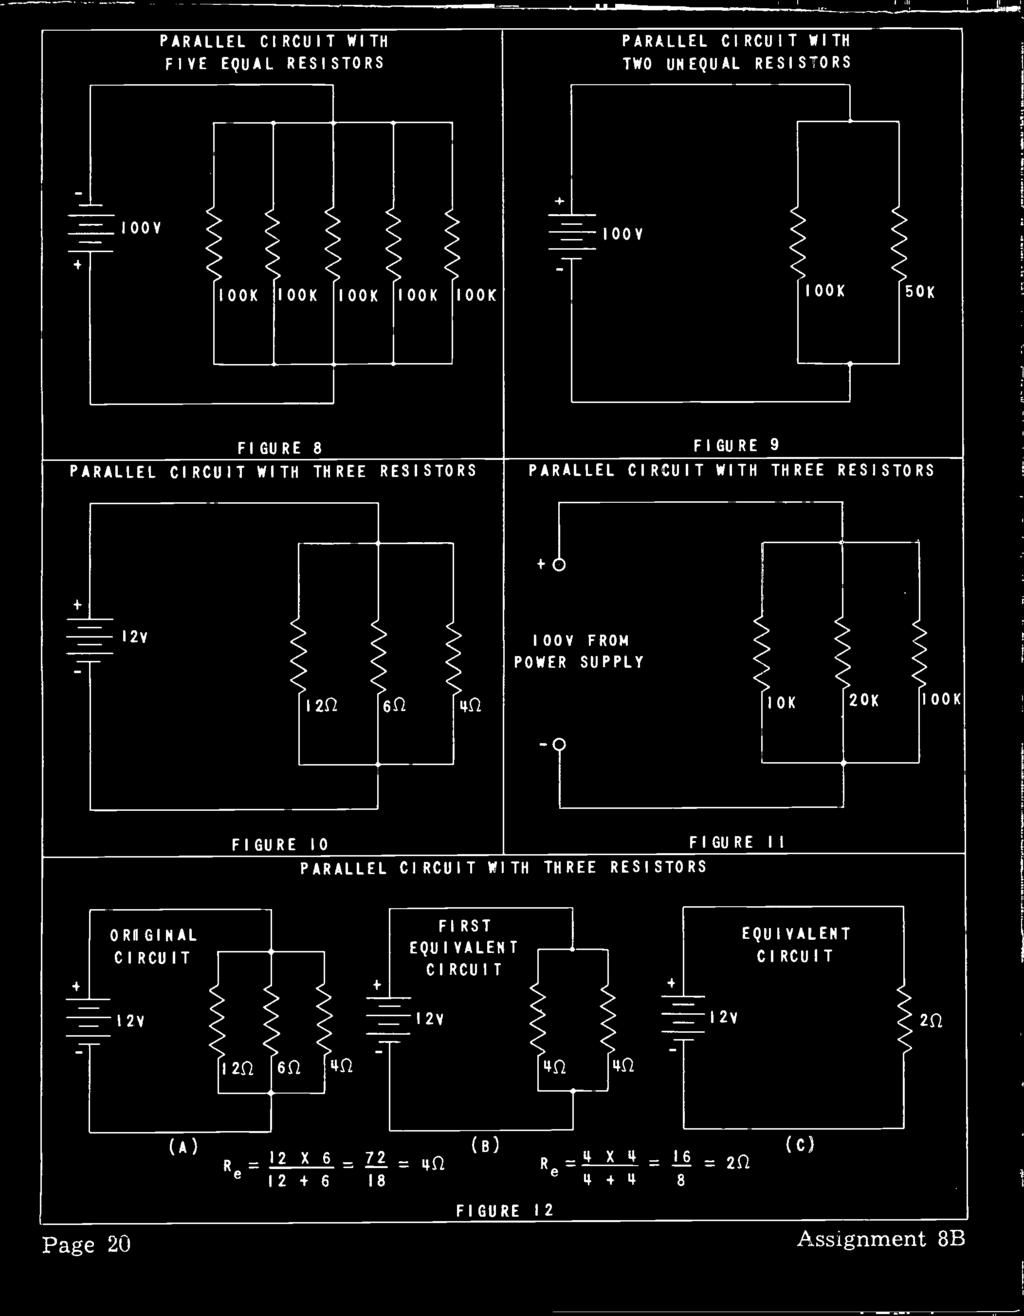 IOOV FROM POWER SUPPLY I2f2 sn 4n FIGURE 10 FIGURE I PARALLEL CIRCUIT WITH THREE RESISTORS I ORIGINAL CIRCUIT